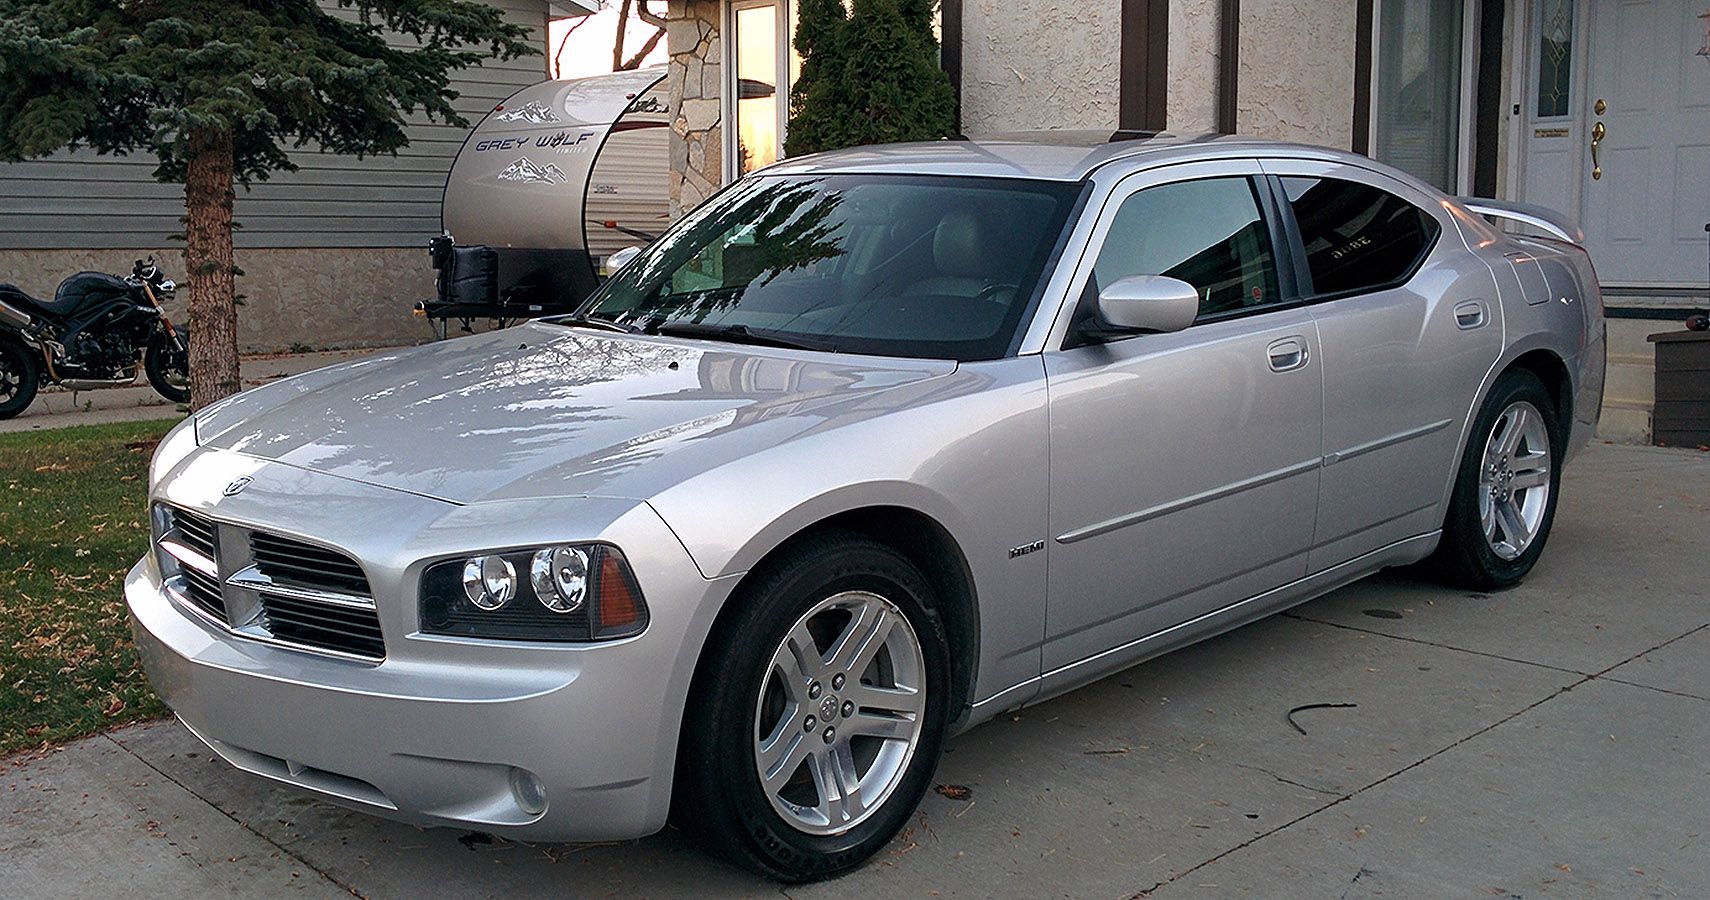 Silver V8-powered 2006 Dodge Charger R/T Muscle Car